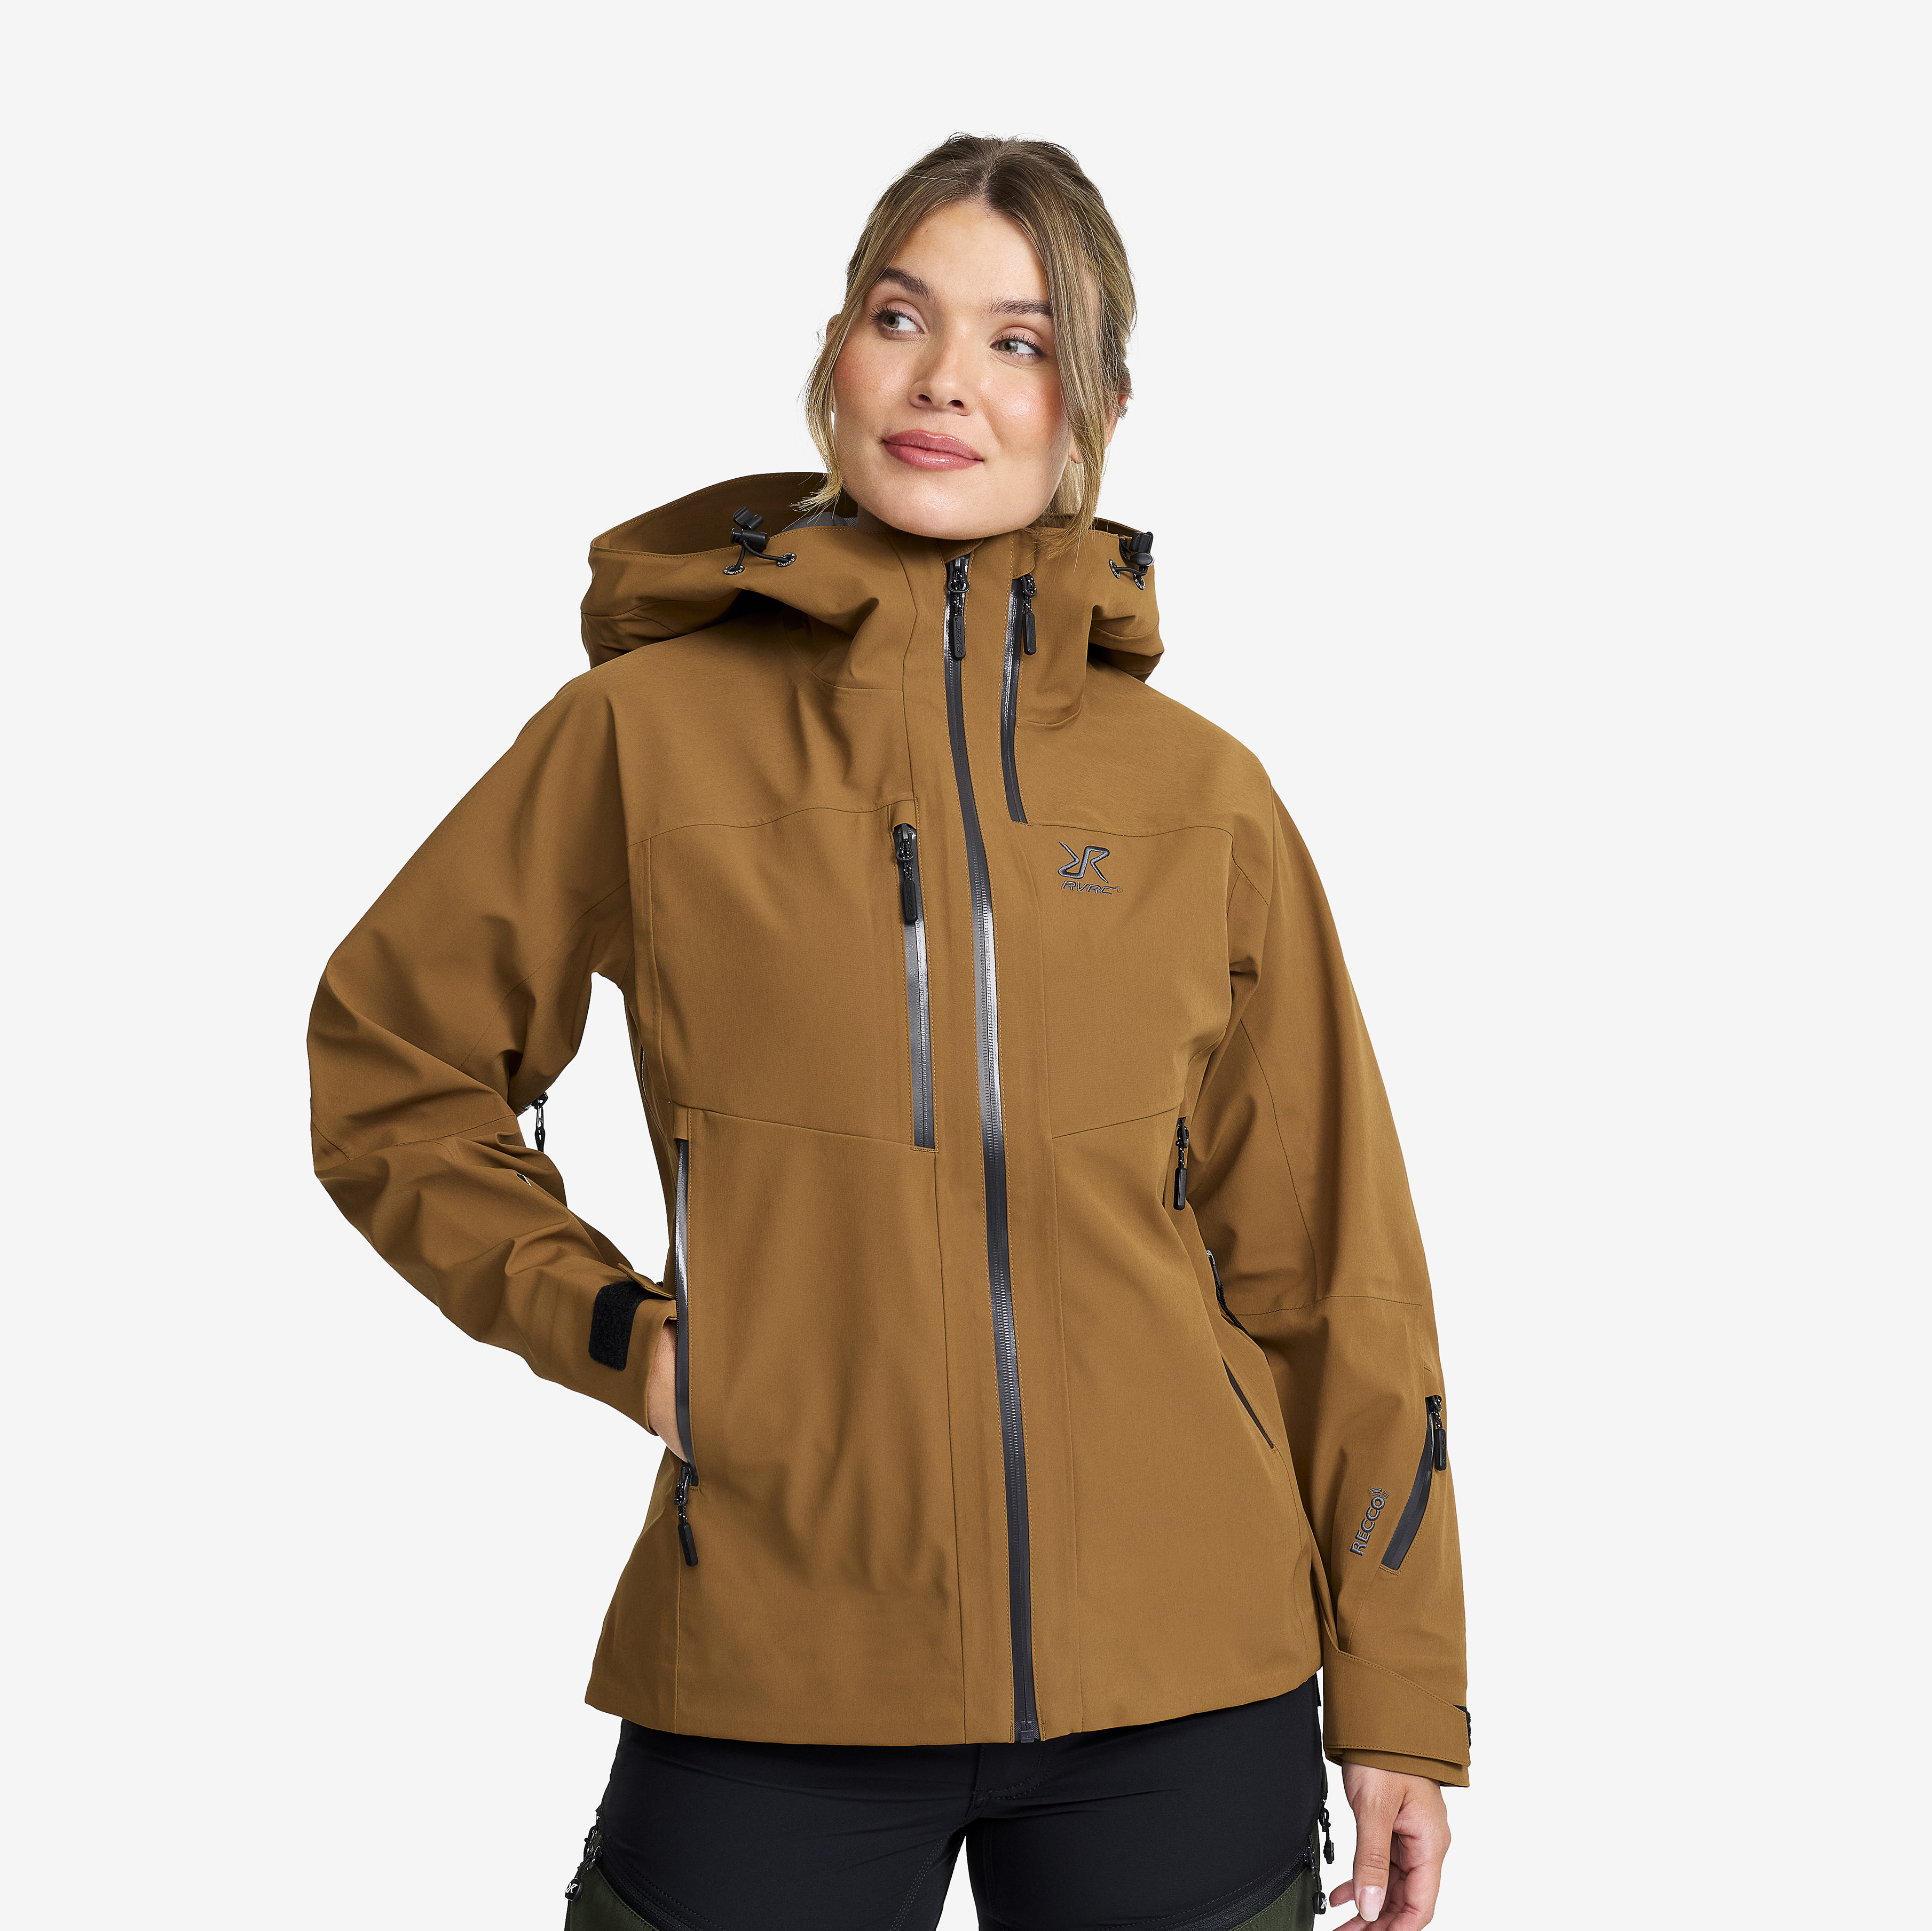 Cyclone 3L Shell Jacket Rubber Mujeres